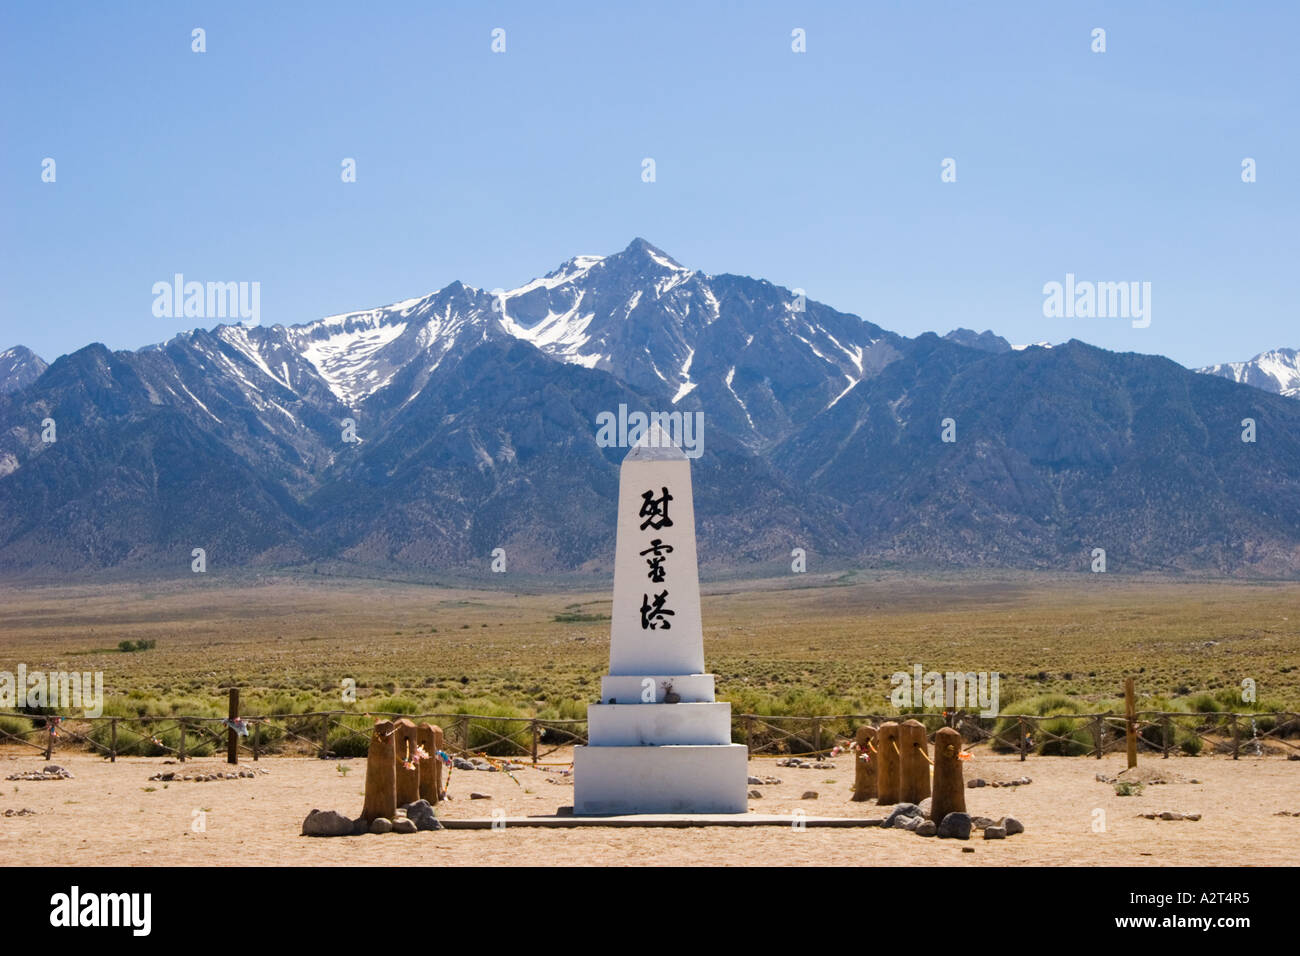 Graveyard monument and the Sierra Nevada mountains Manzanar National Historic Site Inyo County California Stock Photo